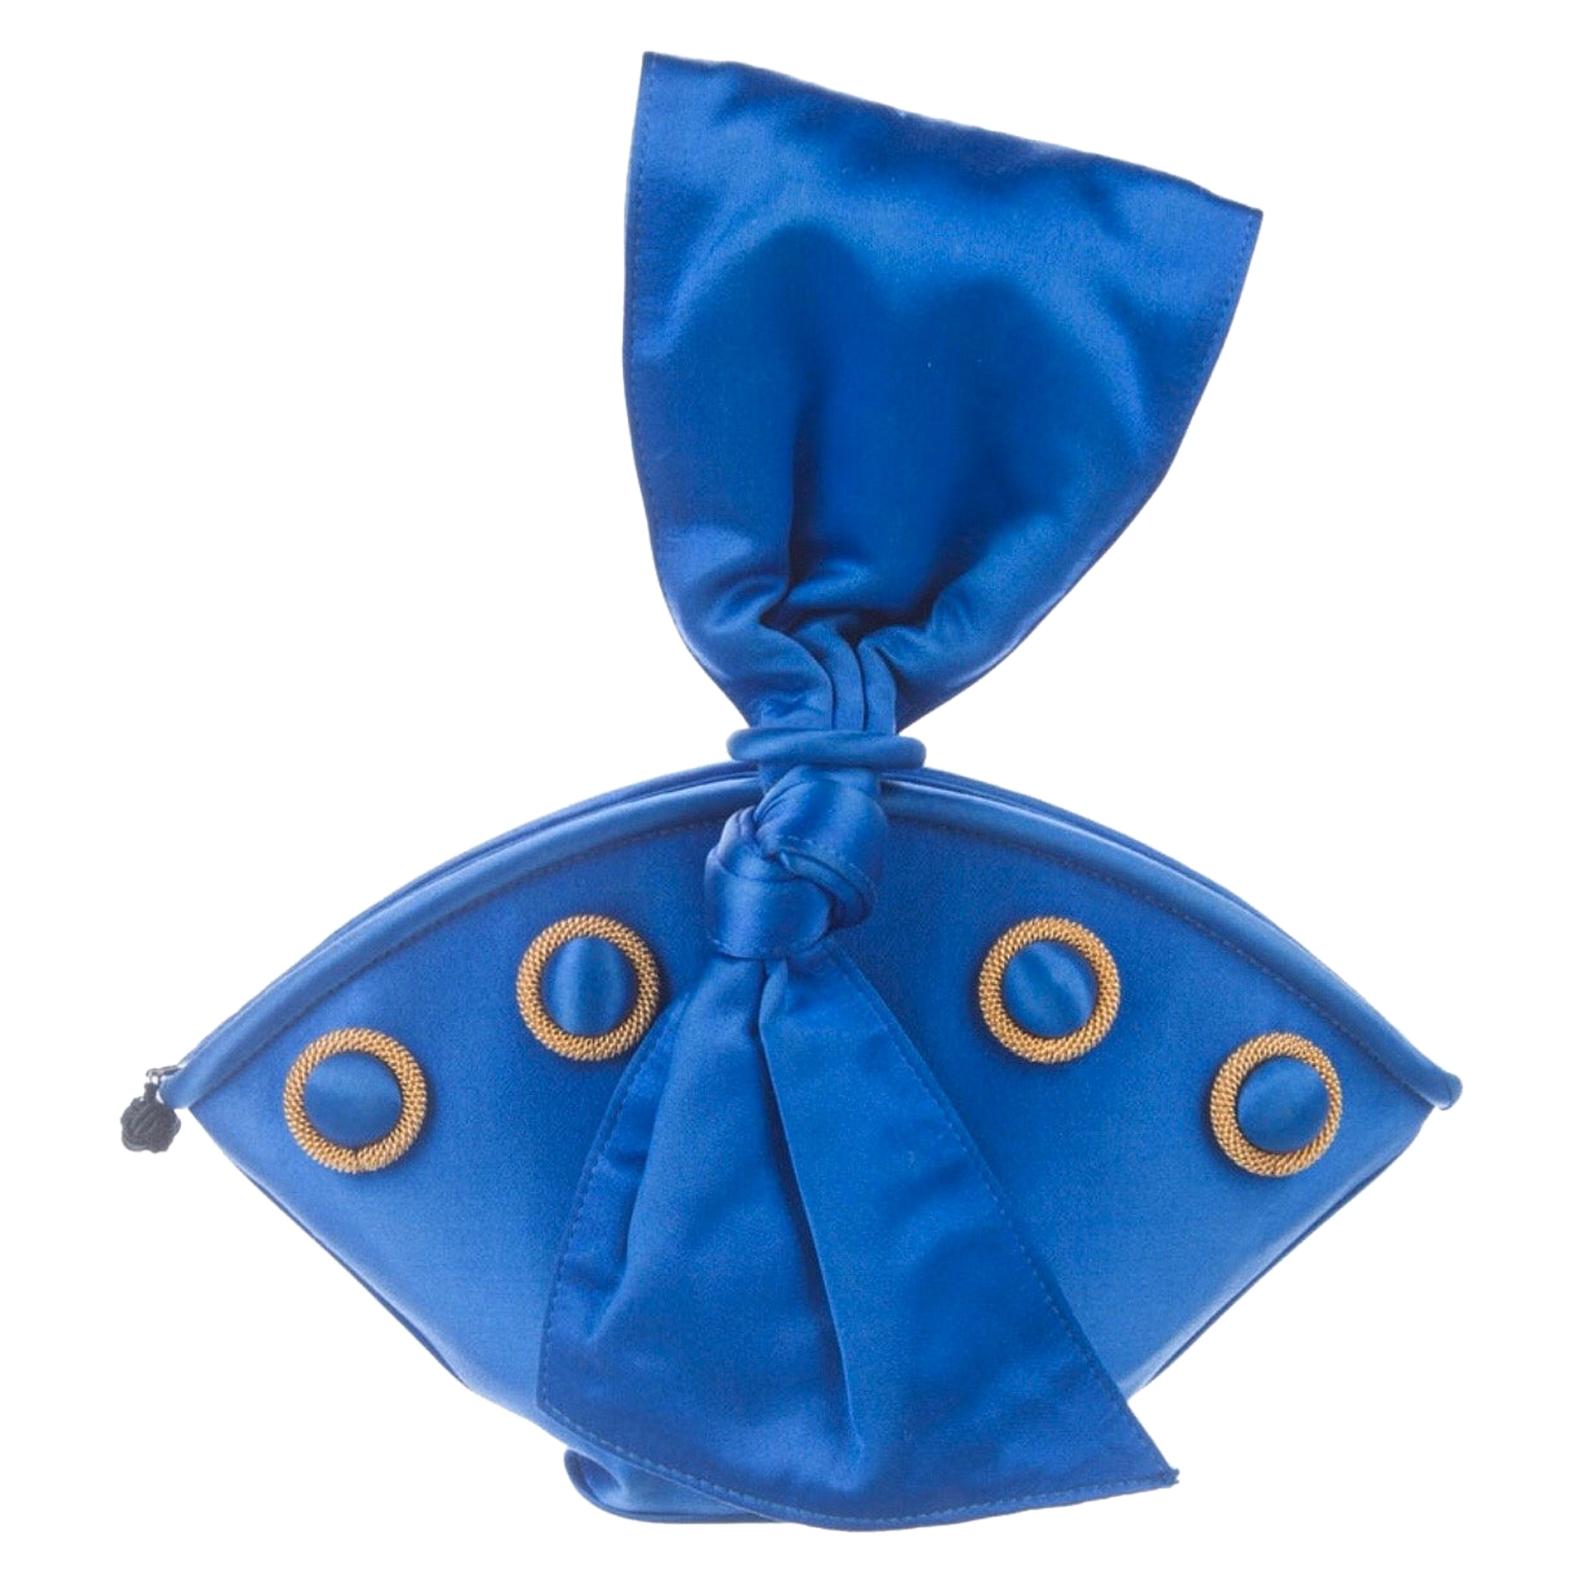 Paloma Picasso Blue Satin Bow Evening Bow, 1980s